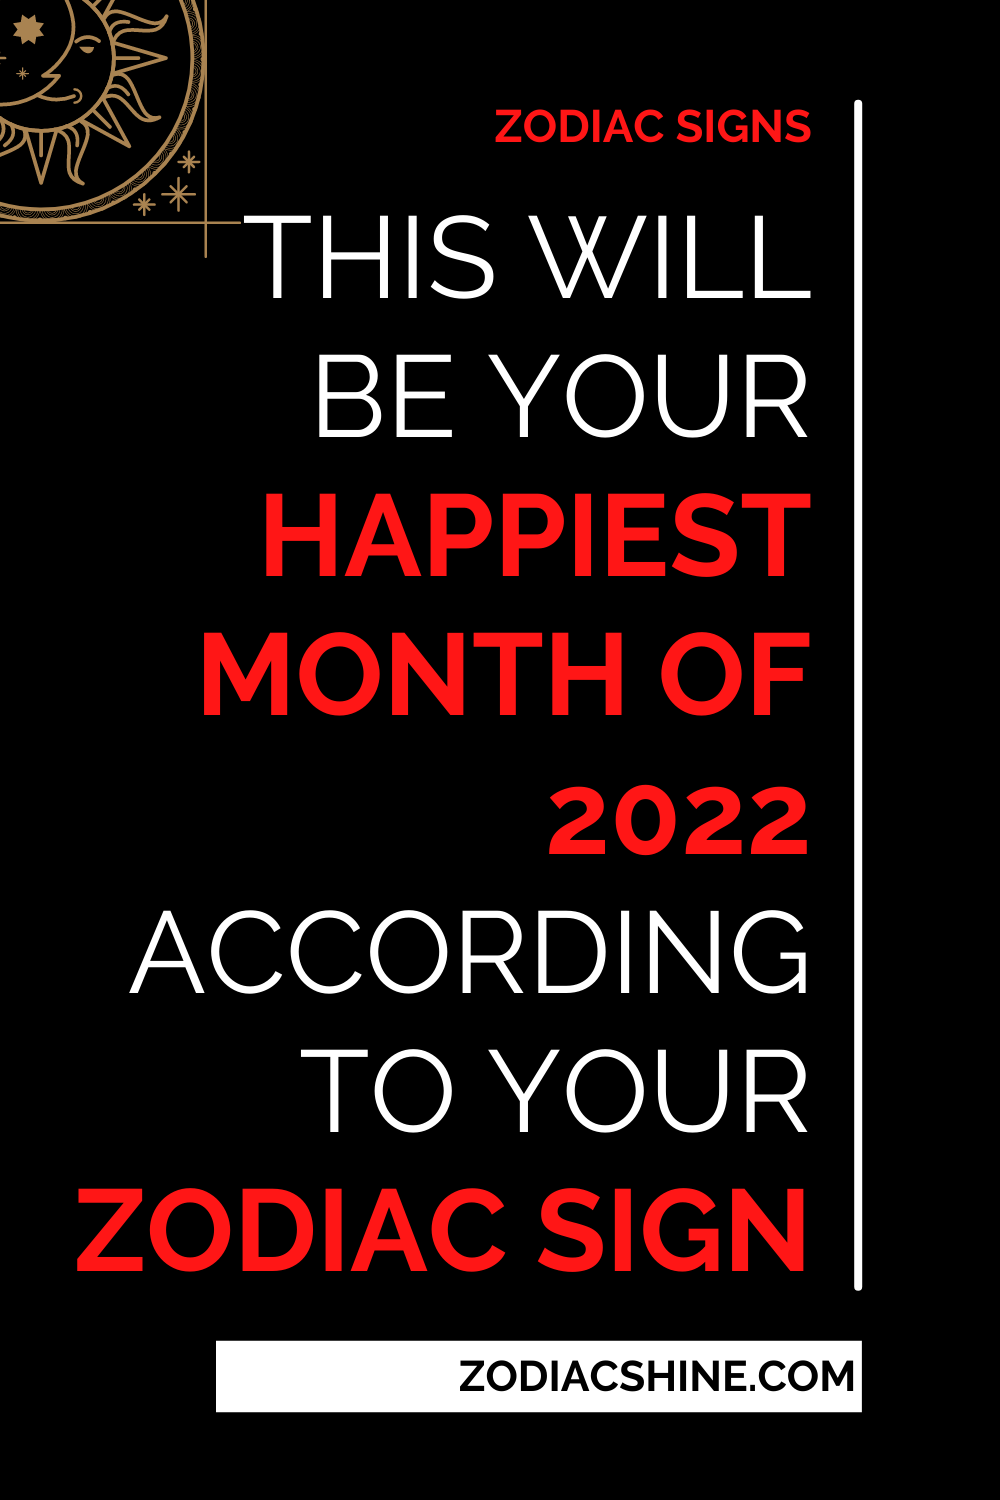 This Will Be Your Happiest Month Of 2022 According To Your Zodiac Sign